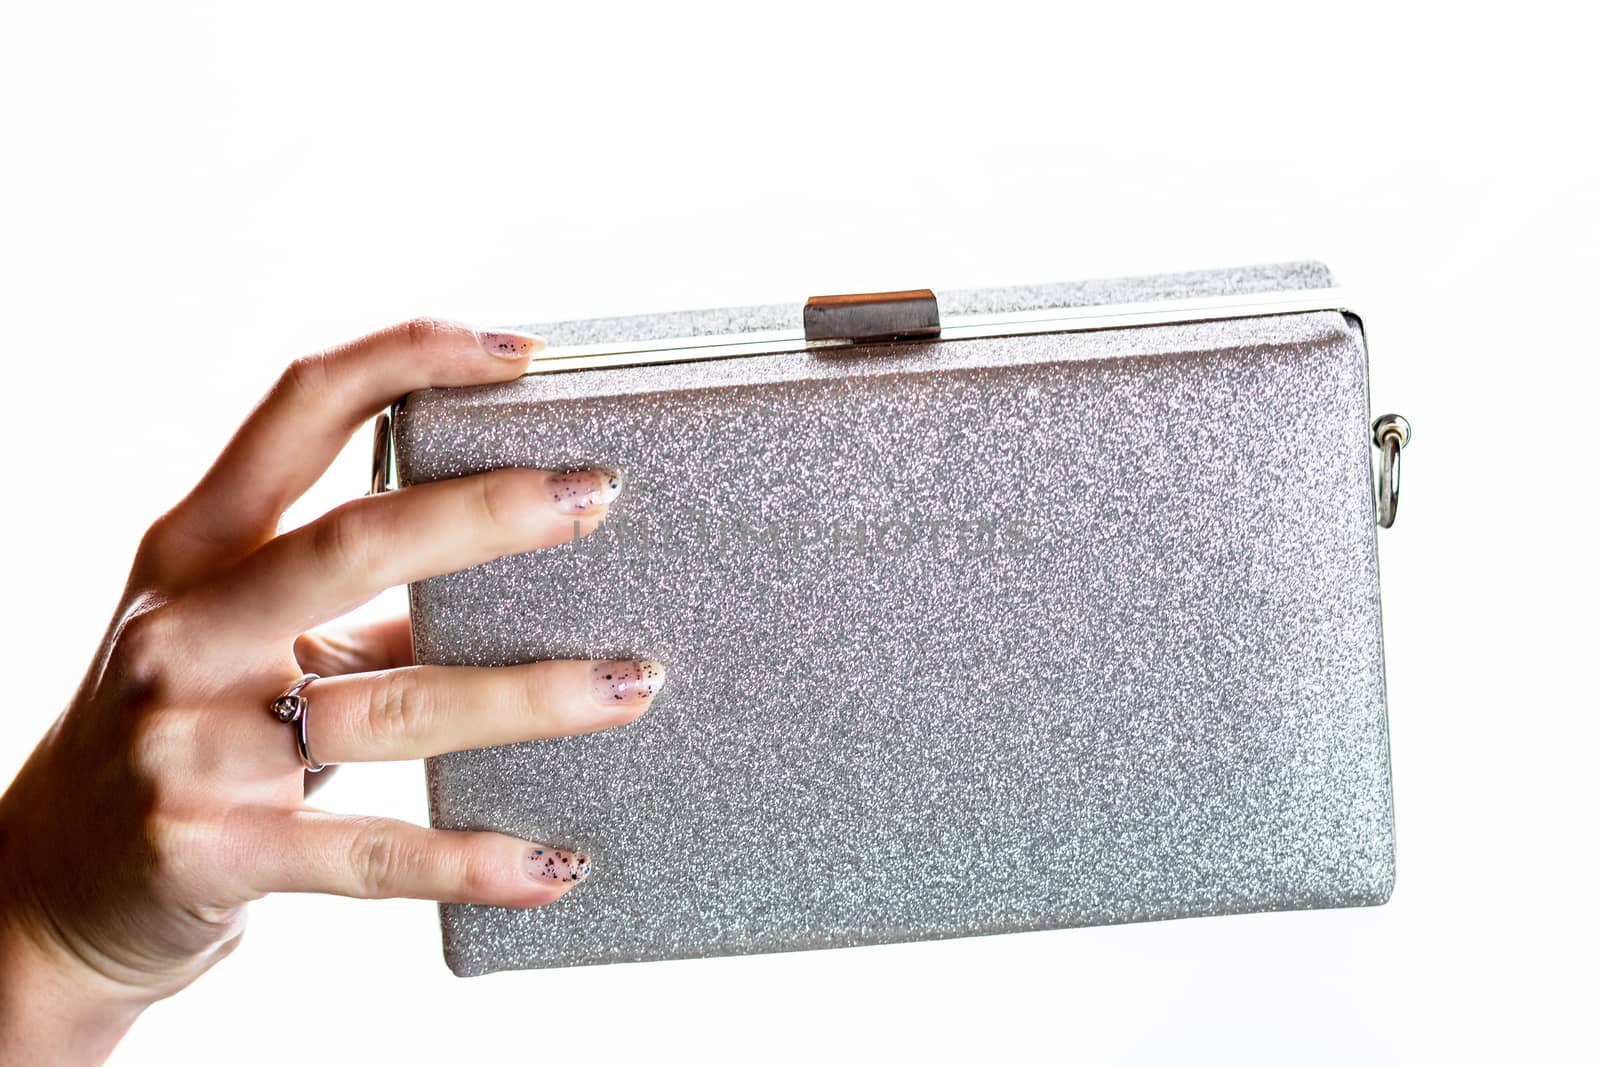 Woman hand holding glittery silver clutch bag isolated on white background with copy space.